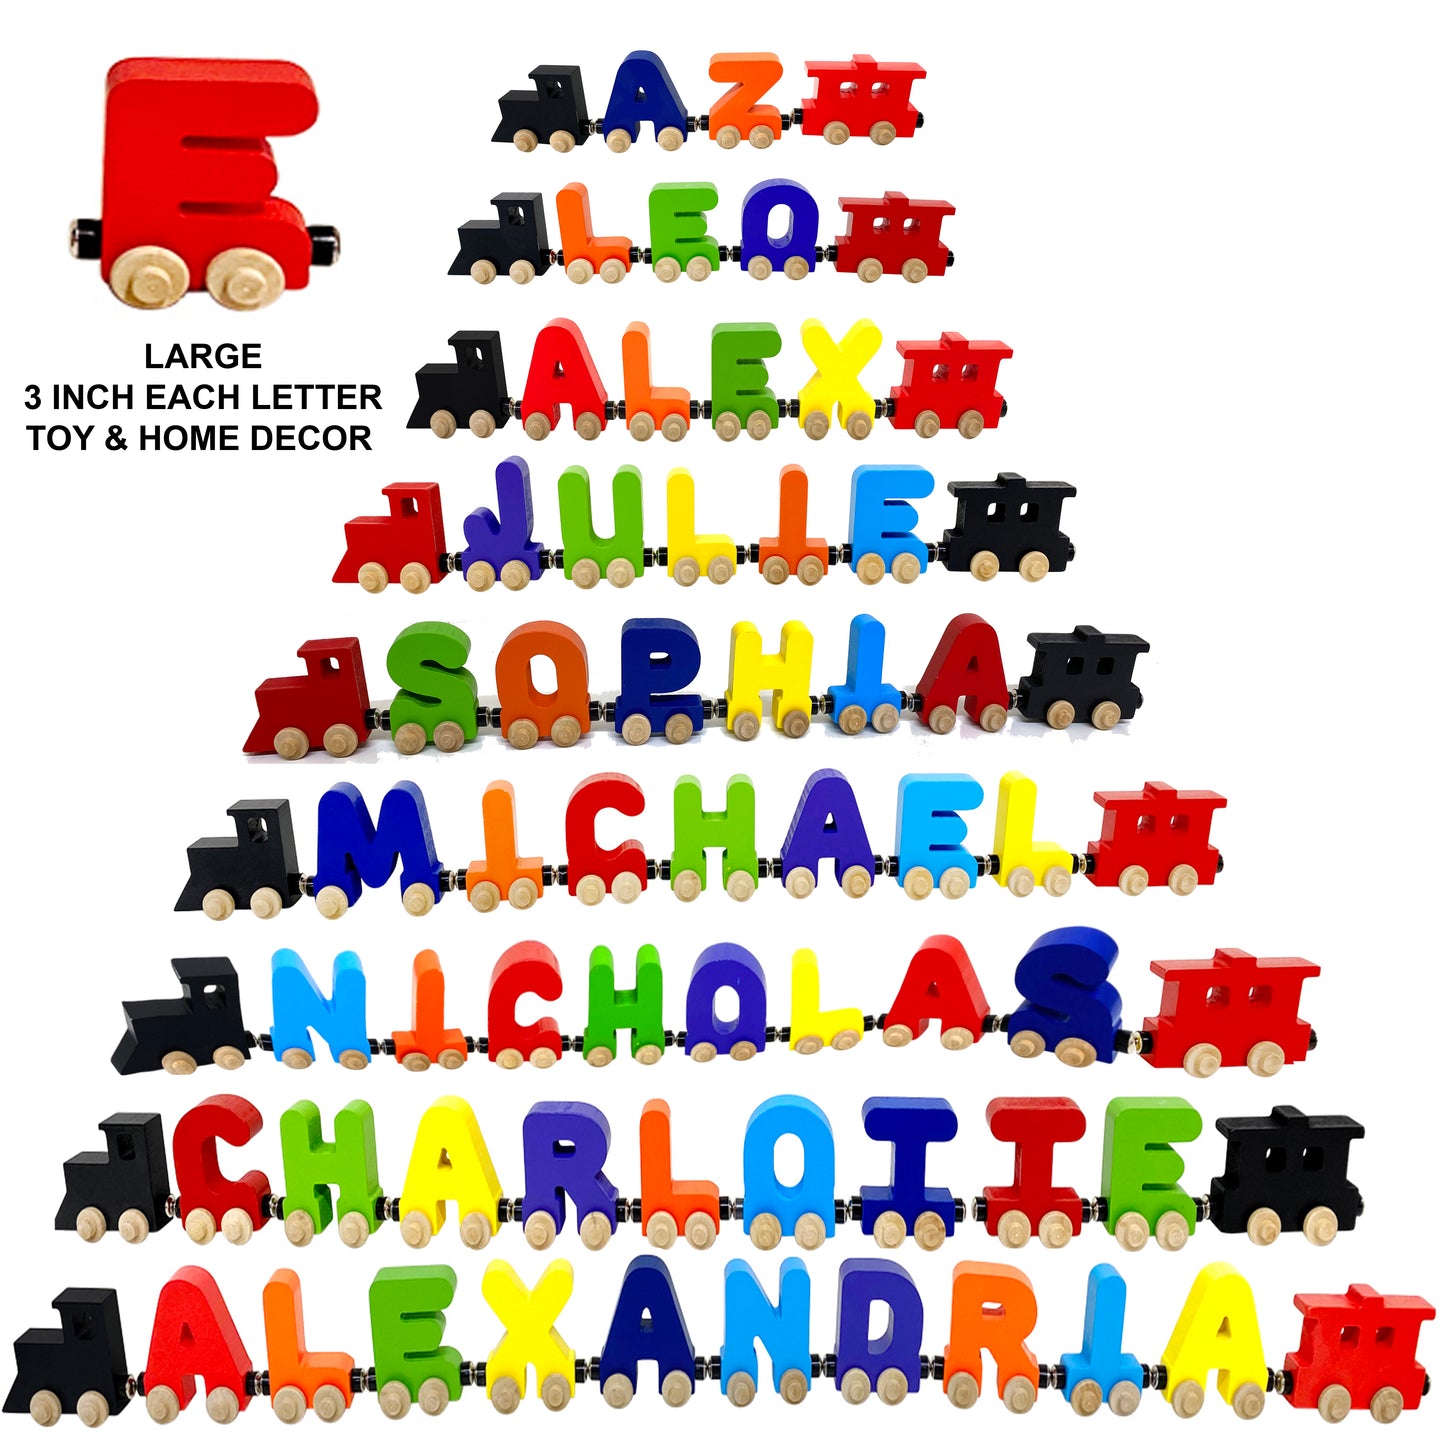 4 Letter Train Wooden Perosnalized Name Letters Includes Train & Wagon Letters Puzzle Includes Train & Wagon Free